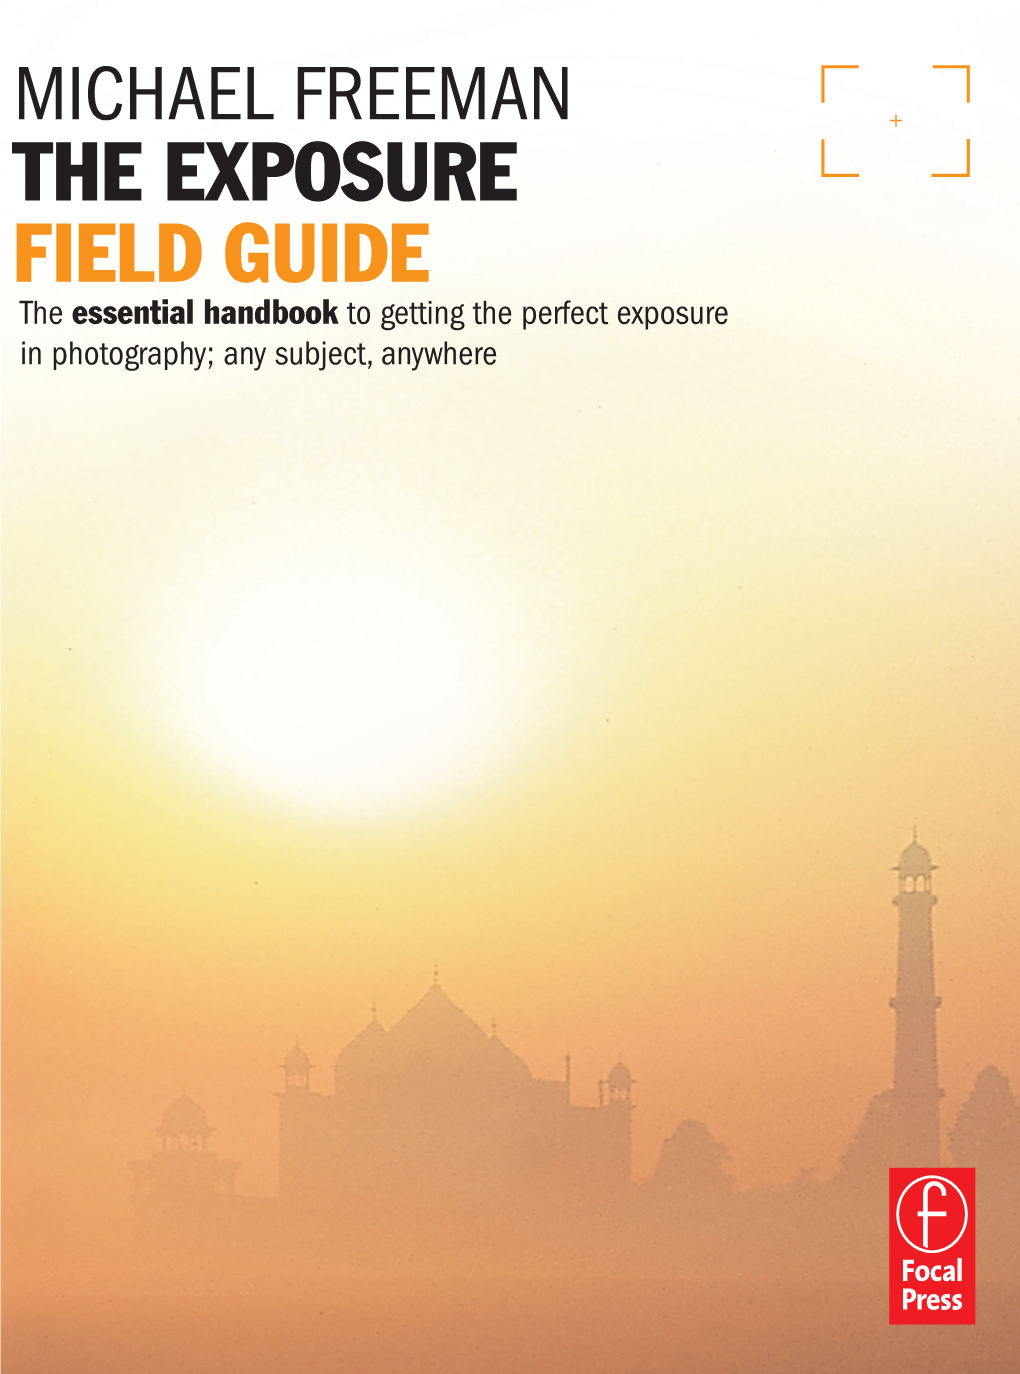 The Exposure Field Guide